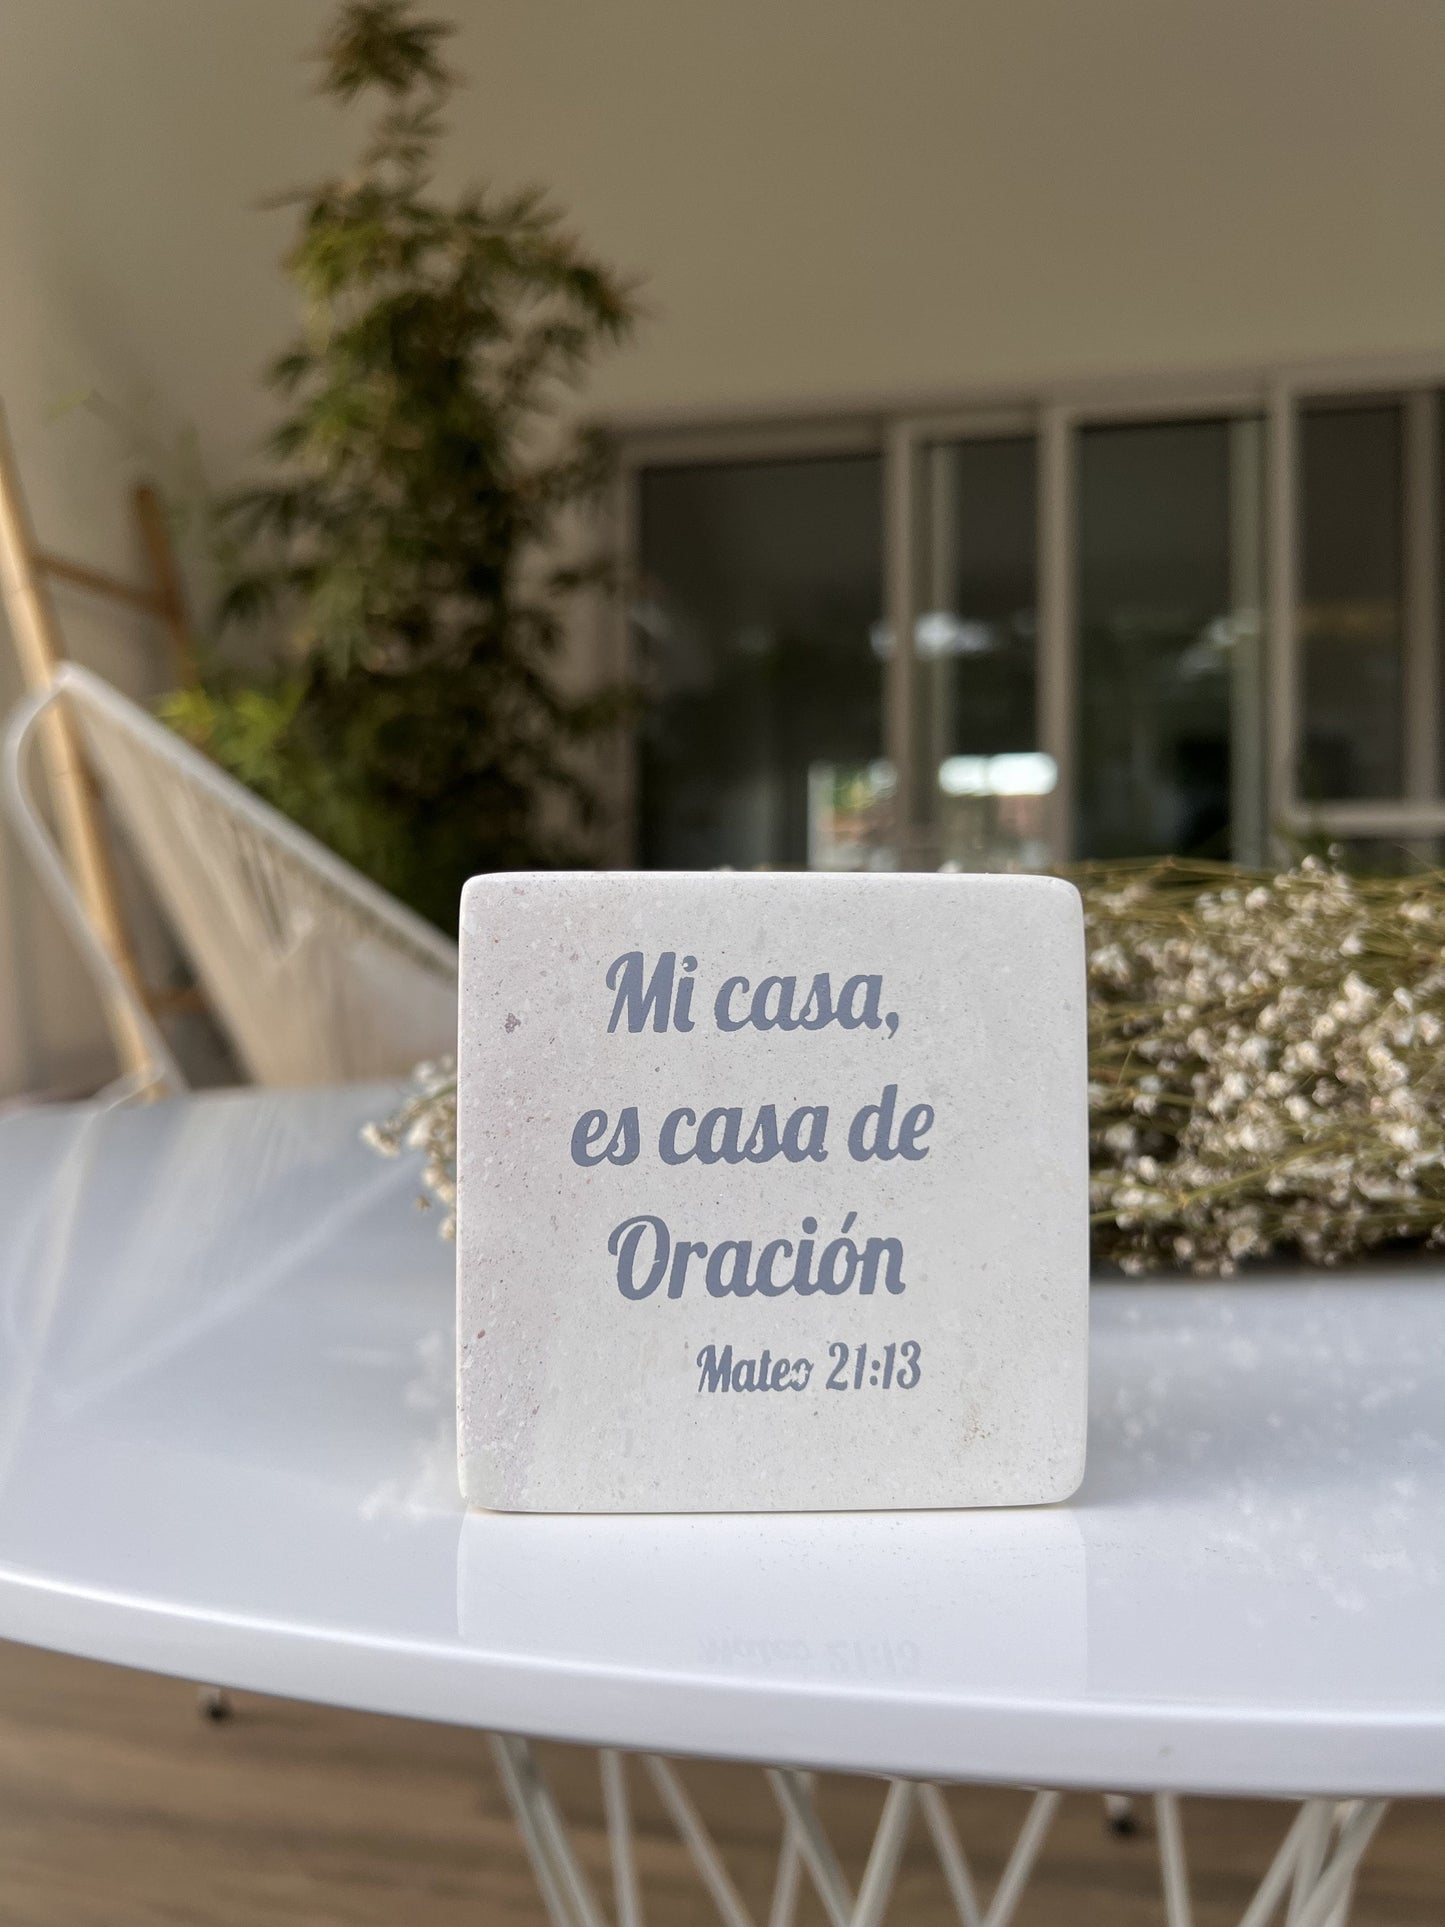 Hand-Carved Soapstone Scripture 3" by 3" - Bible Verse Mateo 21:13 - Español